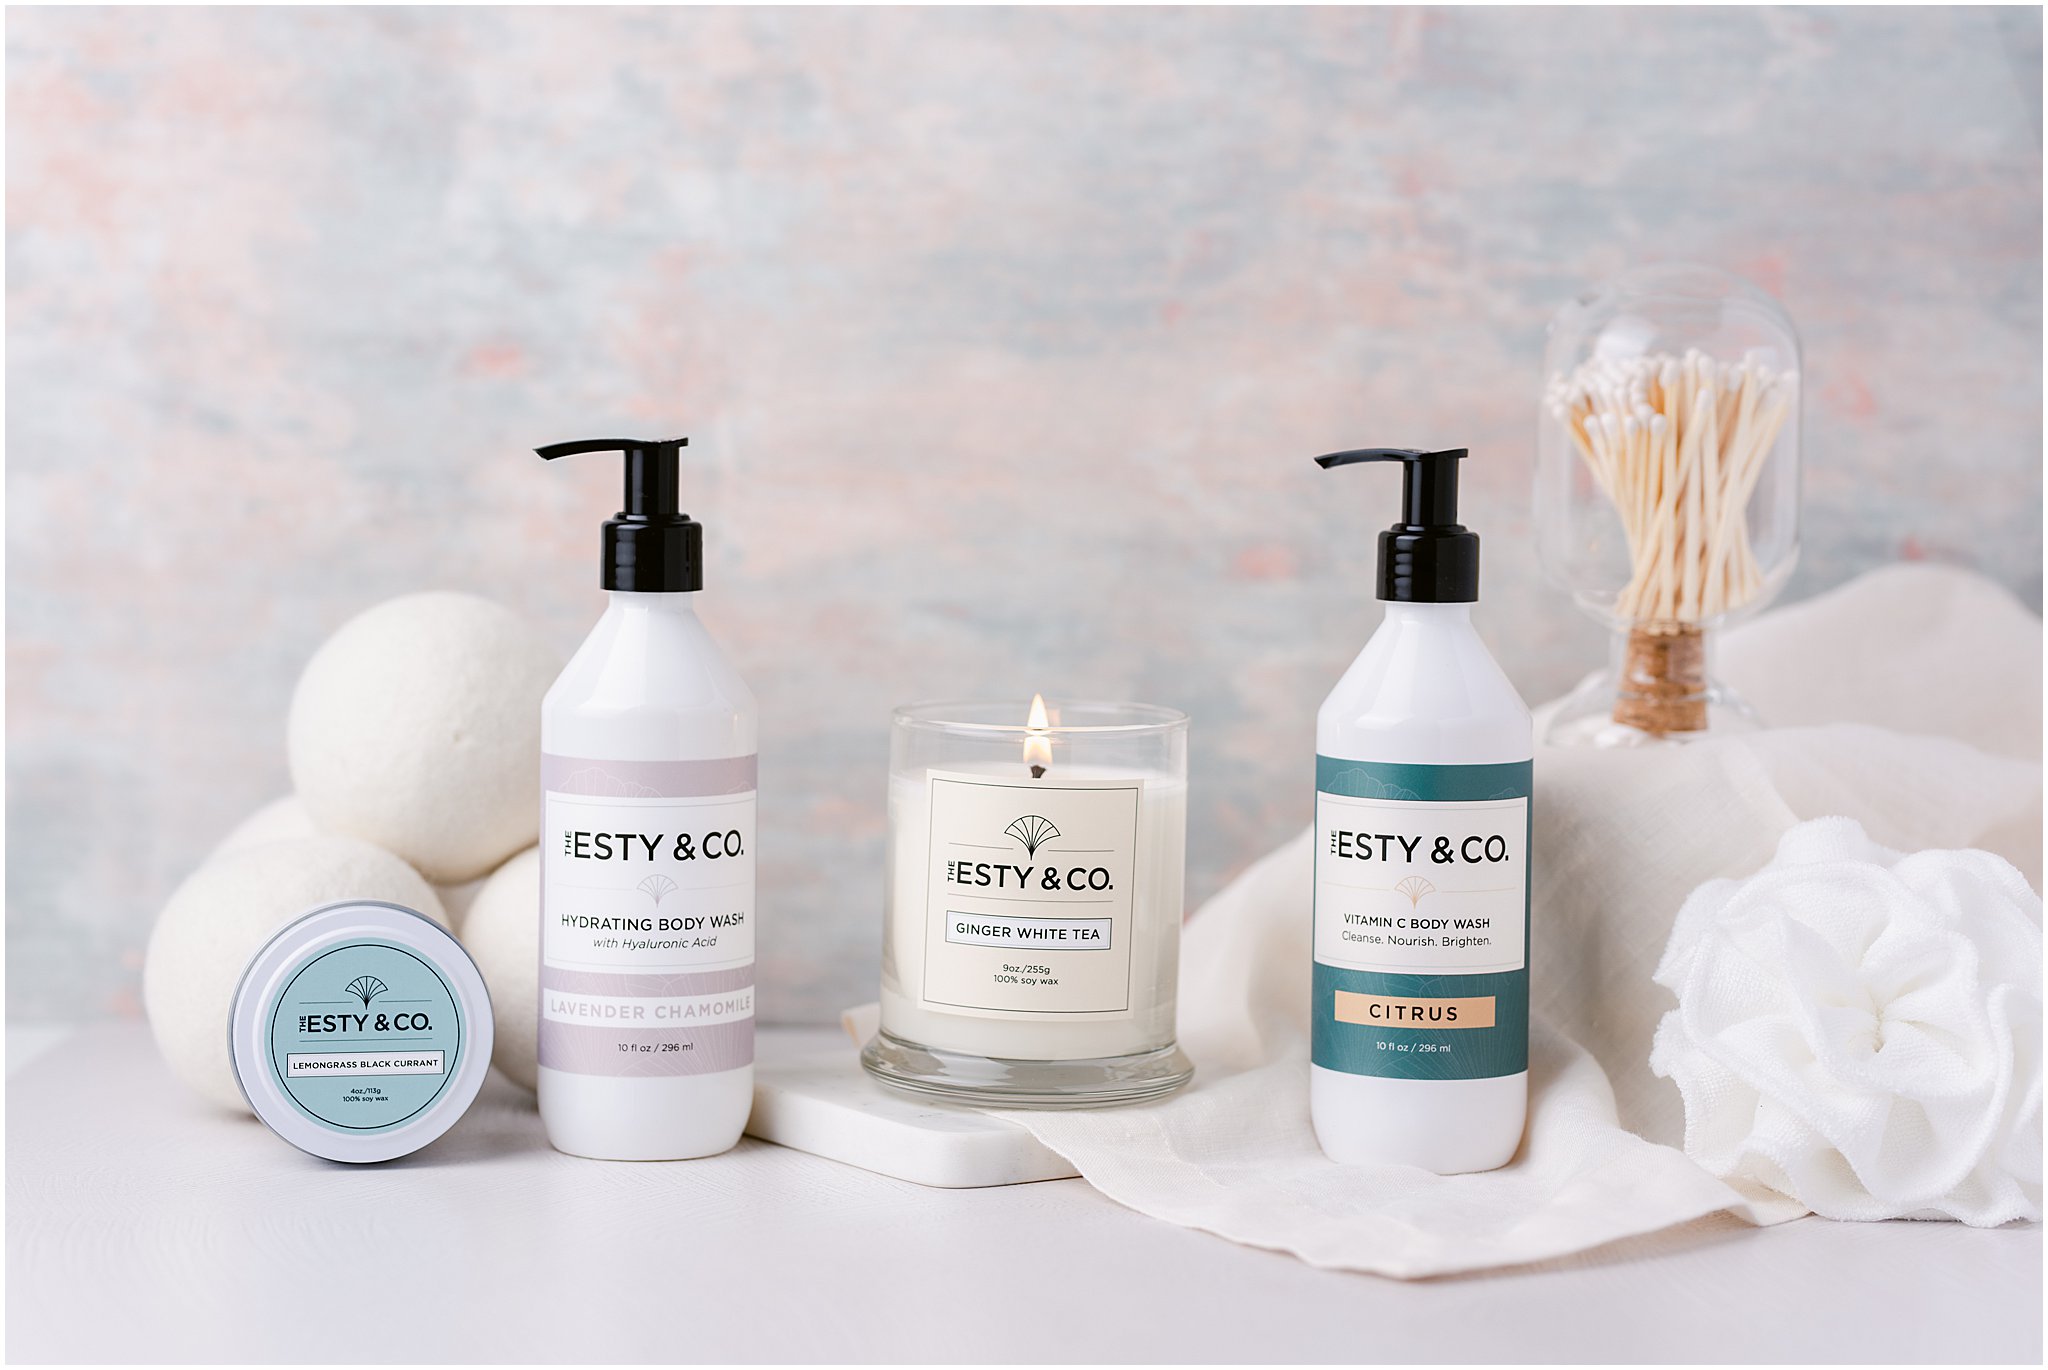 Spa products in serene, soft-toned setting.